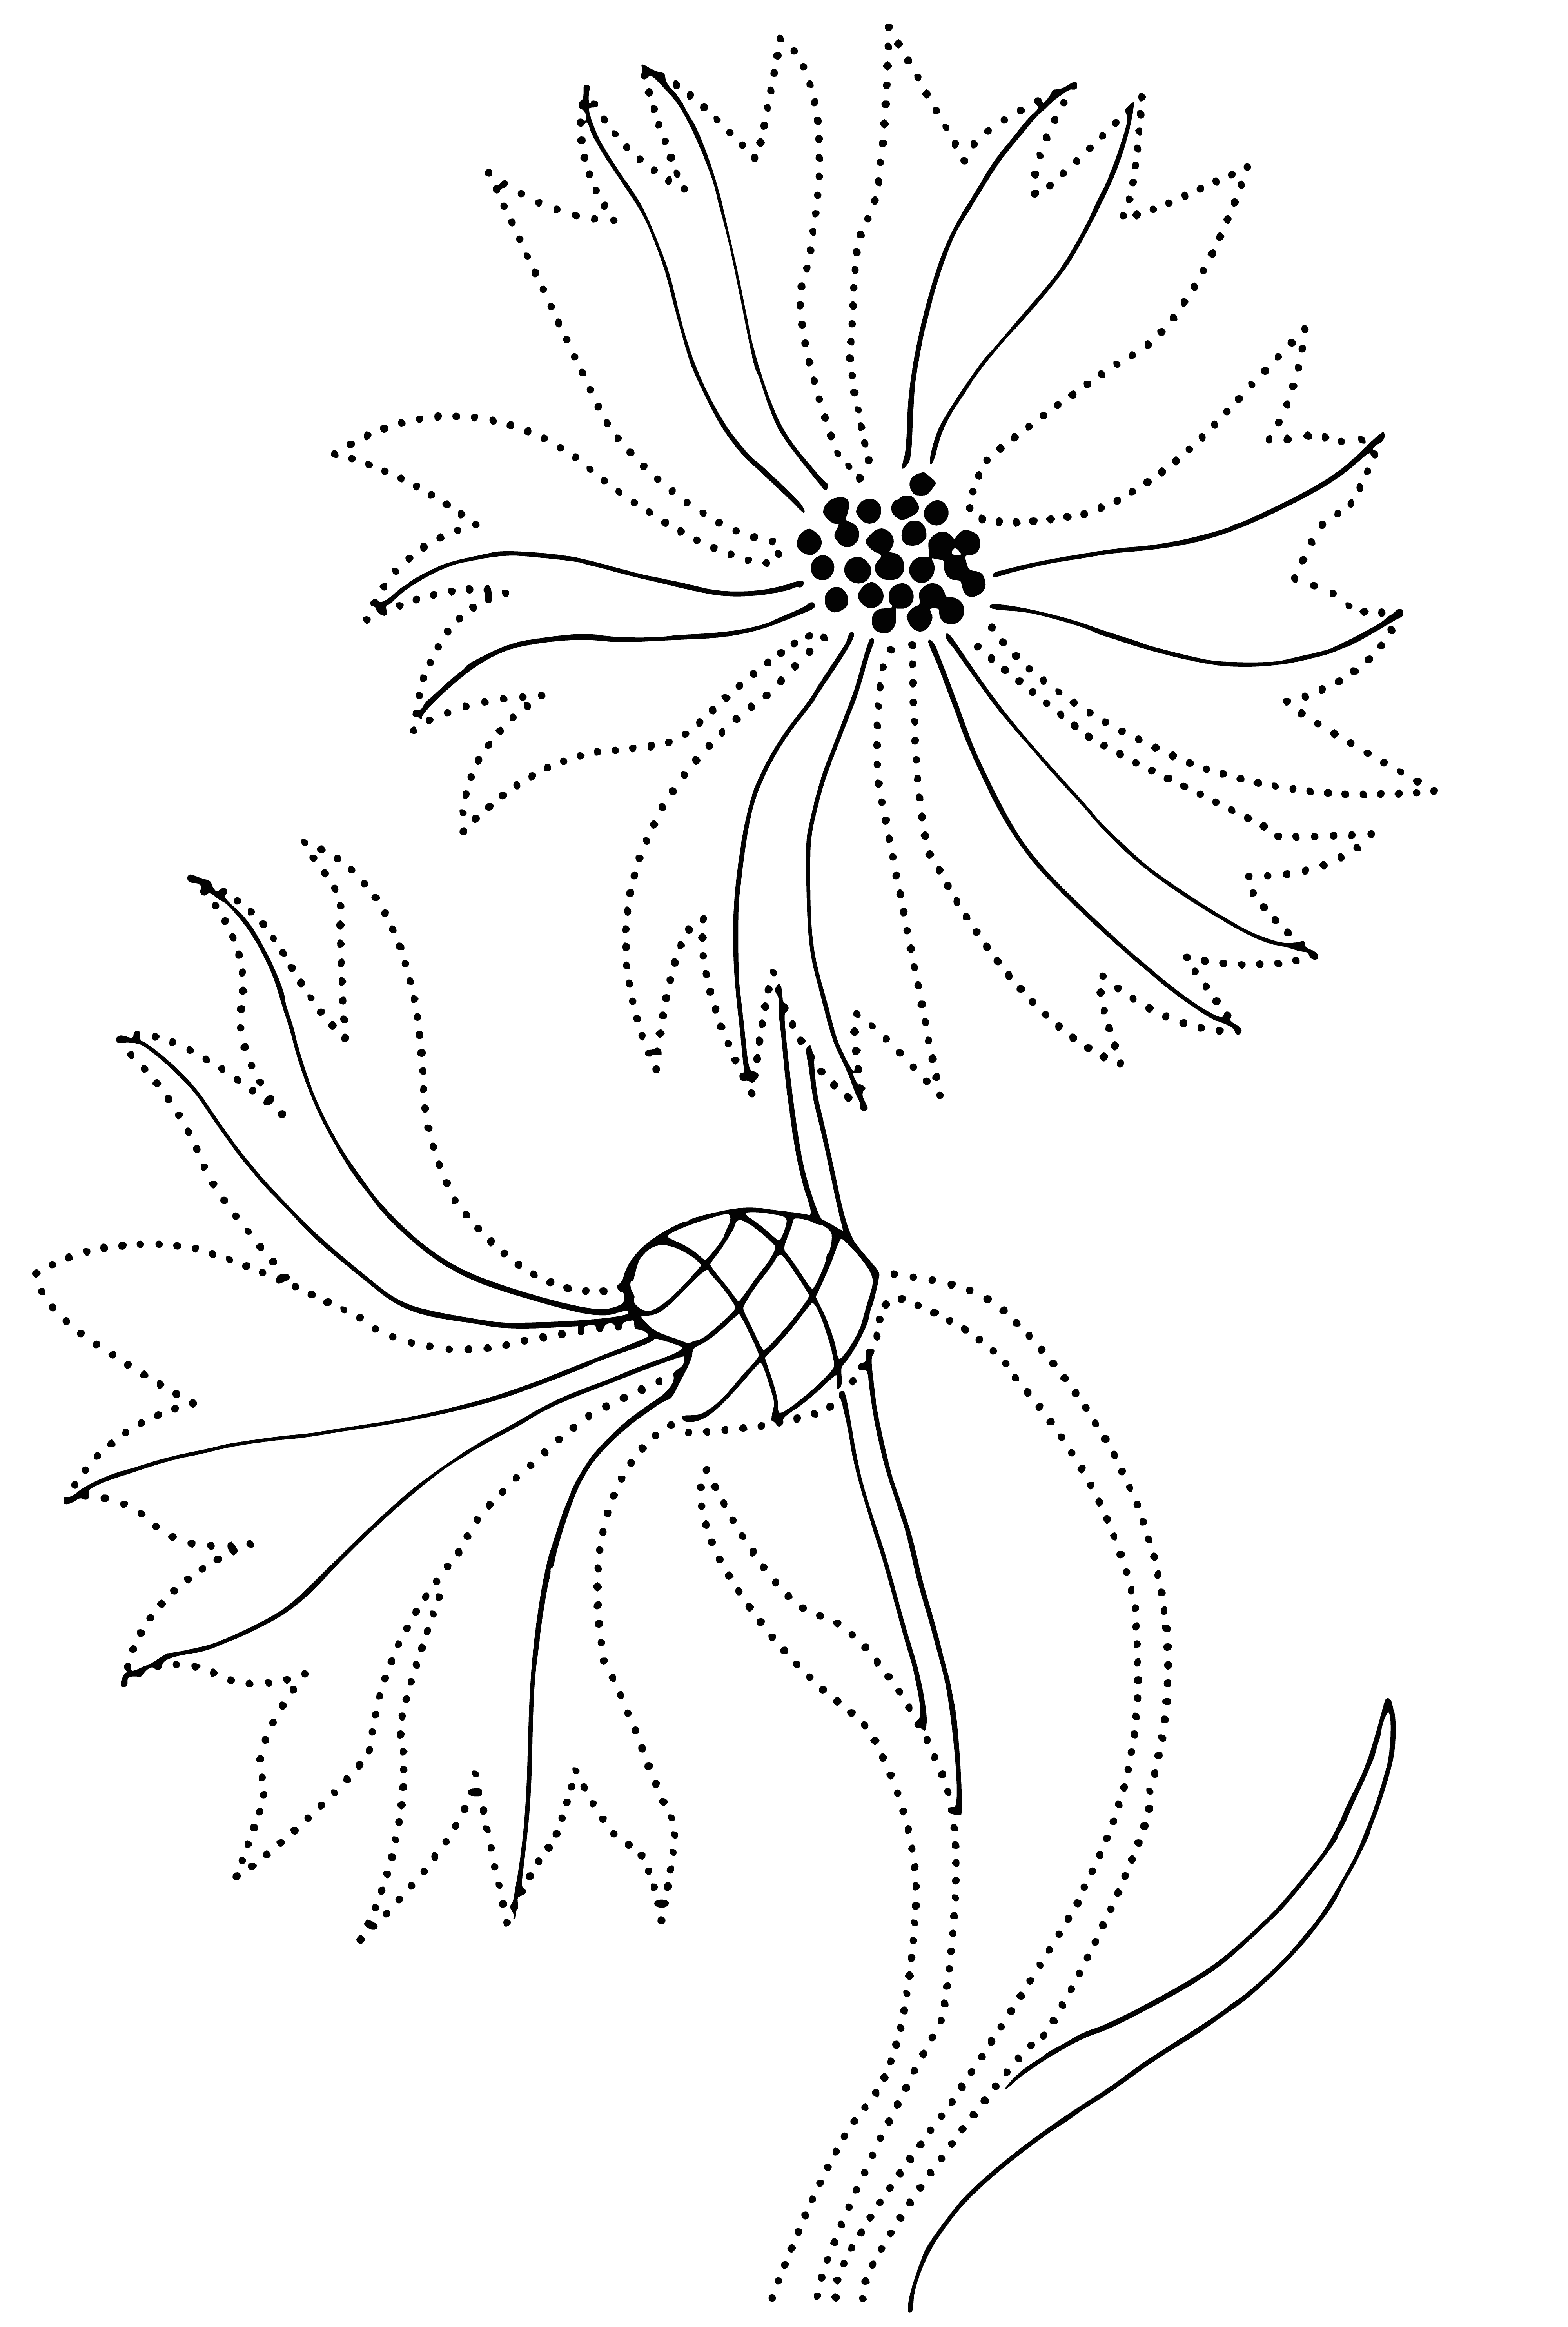 Cornflower coloring page